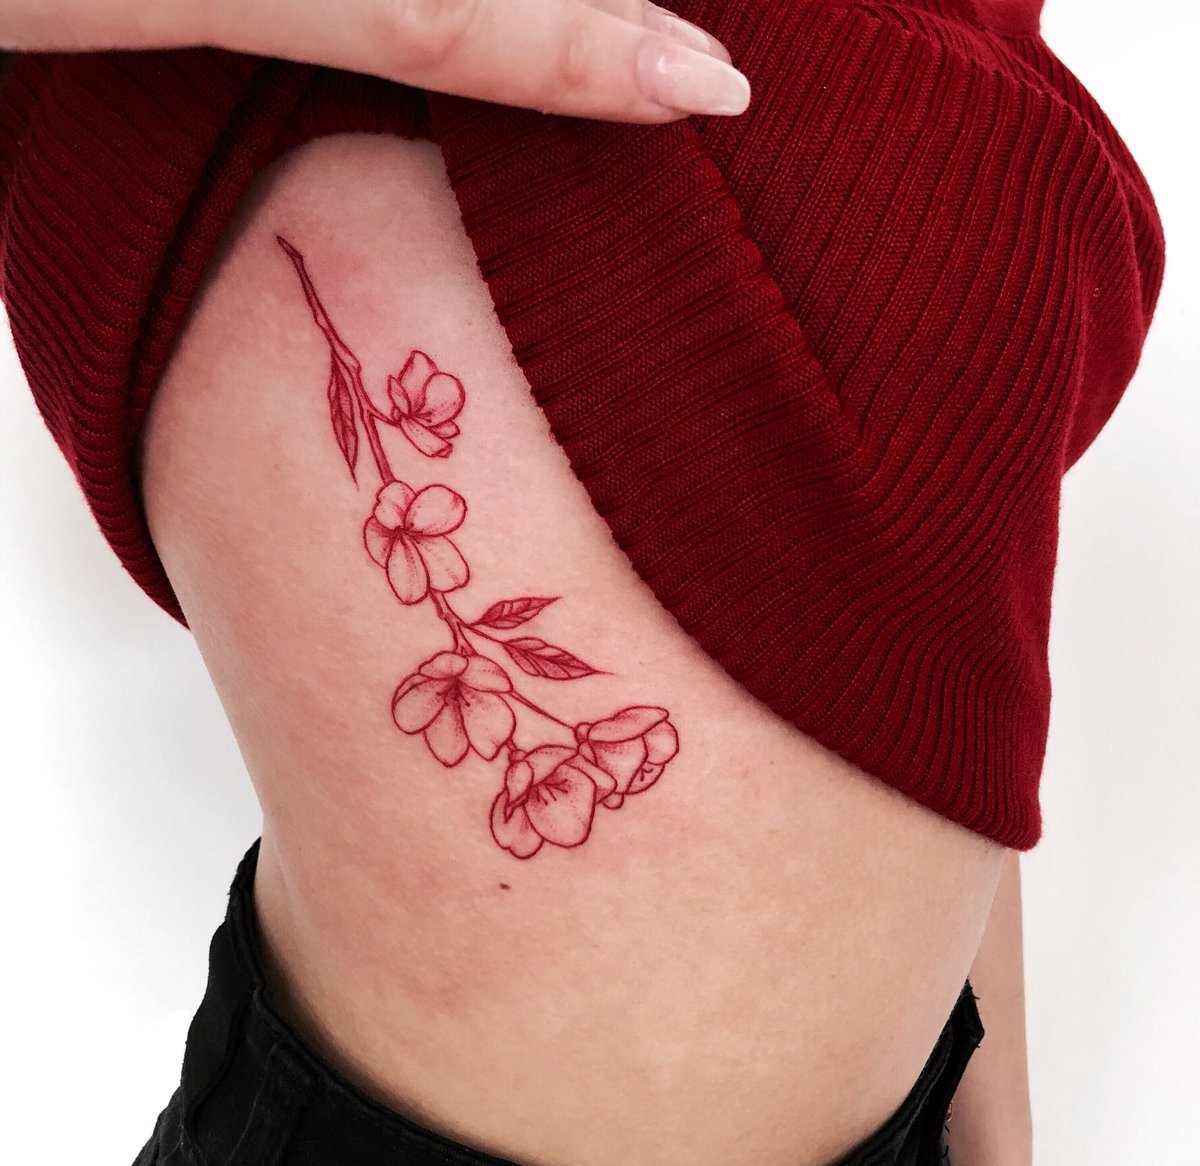 Tattoos for women with flowers on the chest